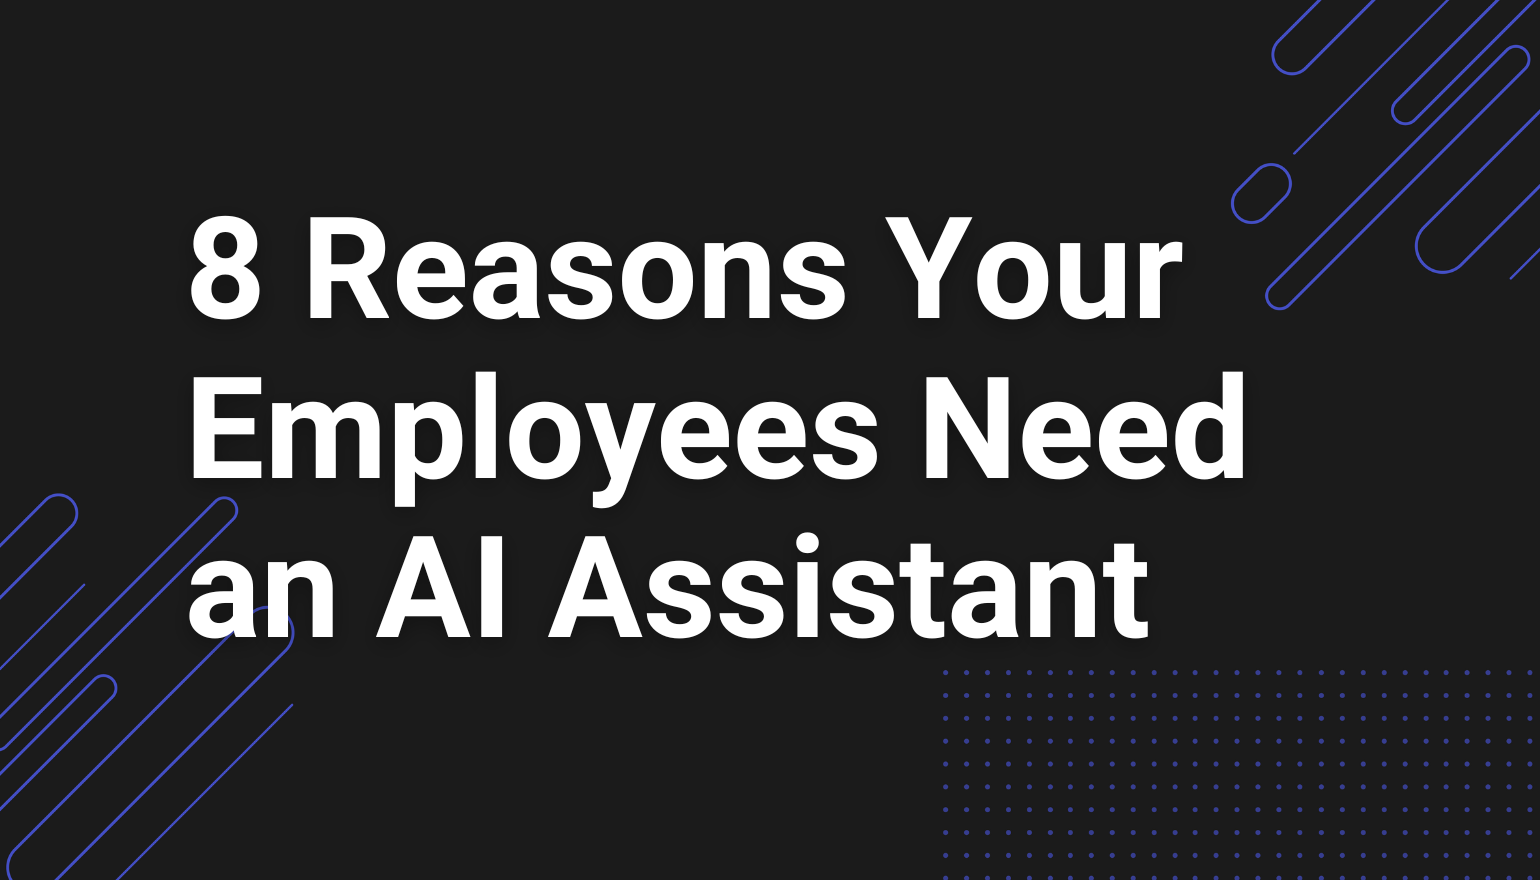 8 Reasons Your Employees Need an AI Assistant